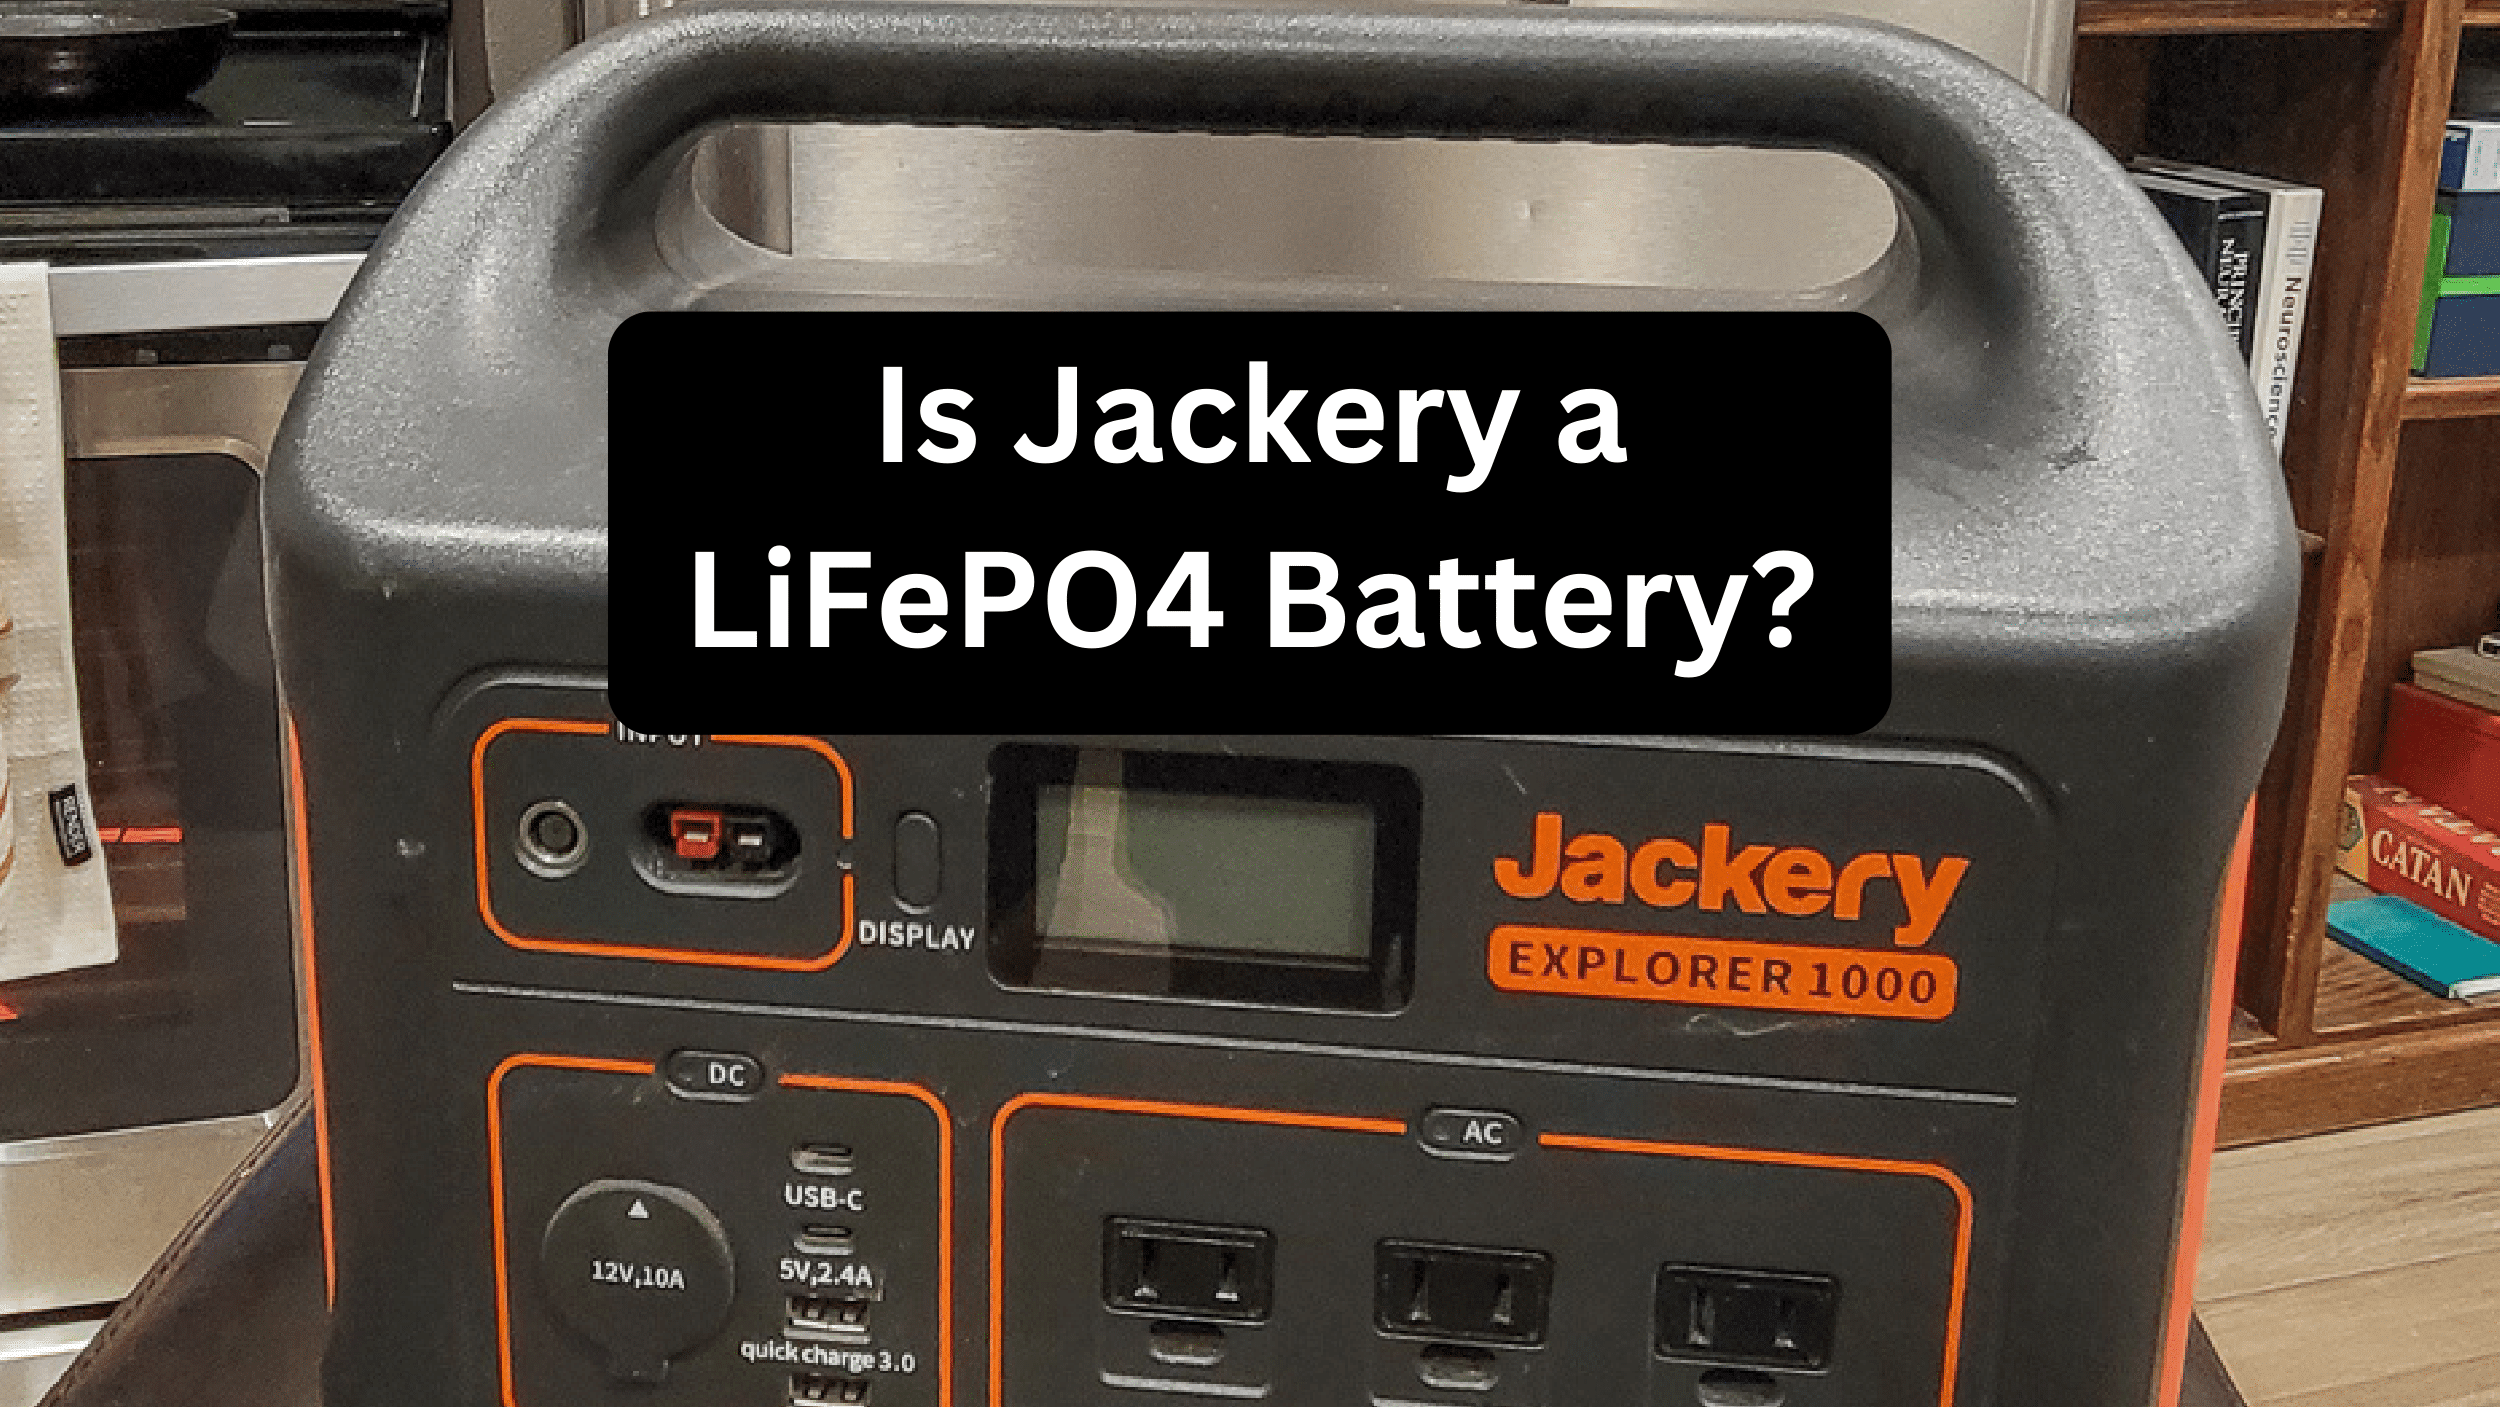 Is Jackery a LiFePO4 Battery? What Kind of Battery is a Jackery?